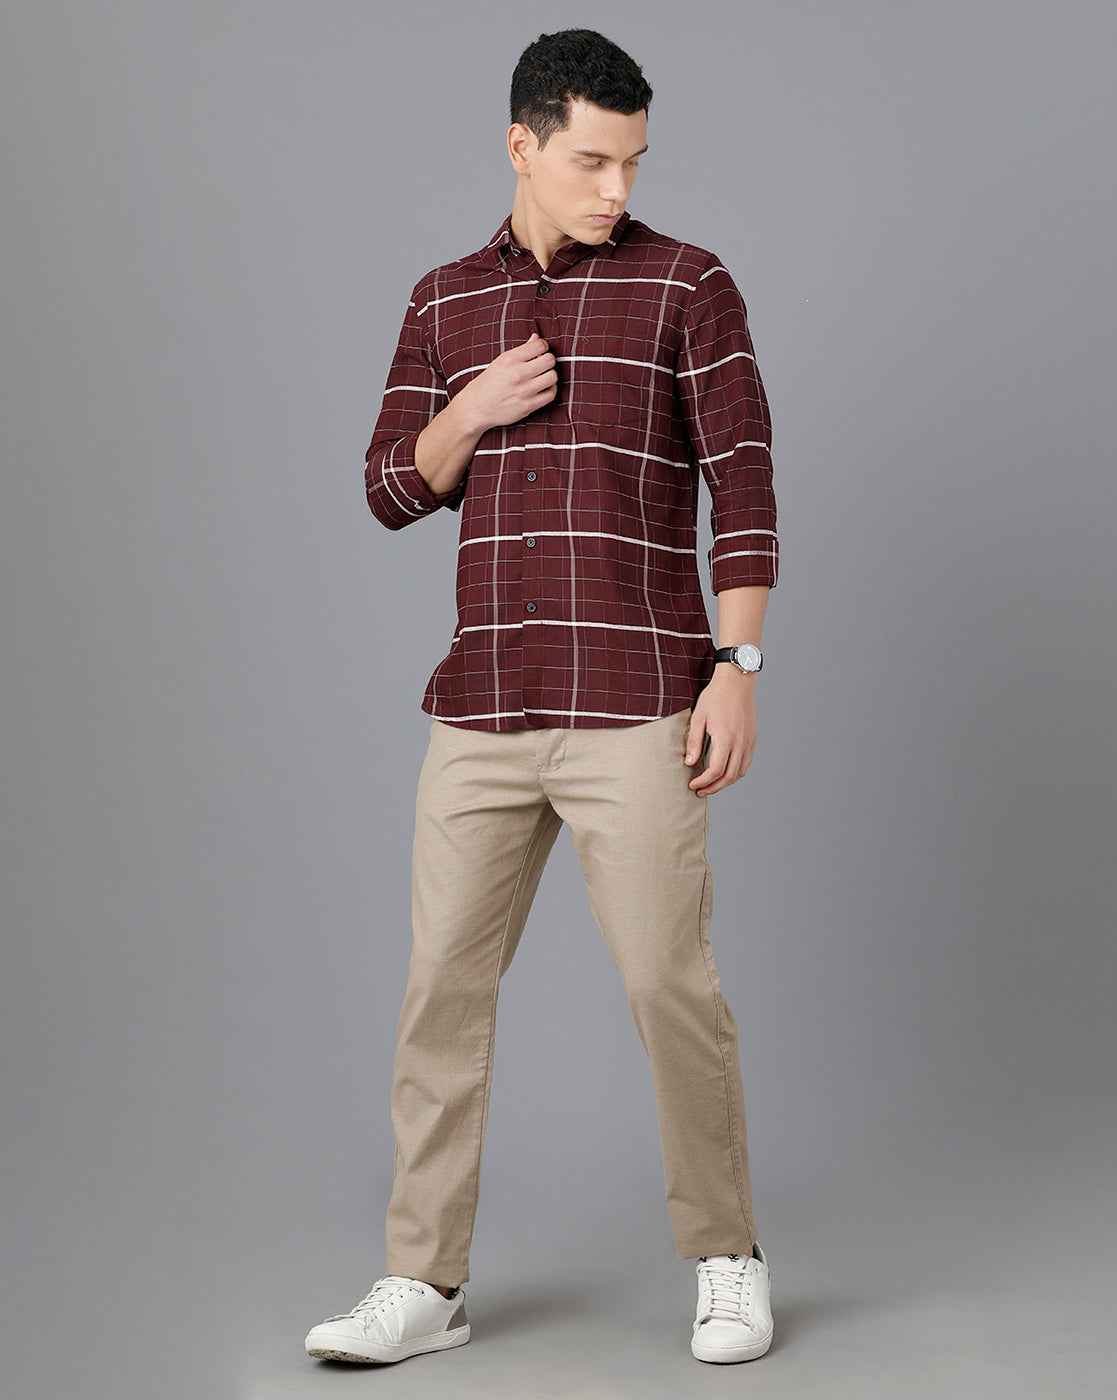 What Color Shirt Goes With Khaki Pants? - HubPages